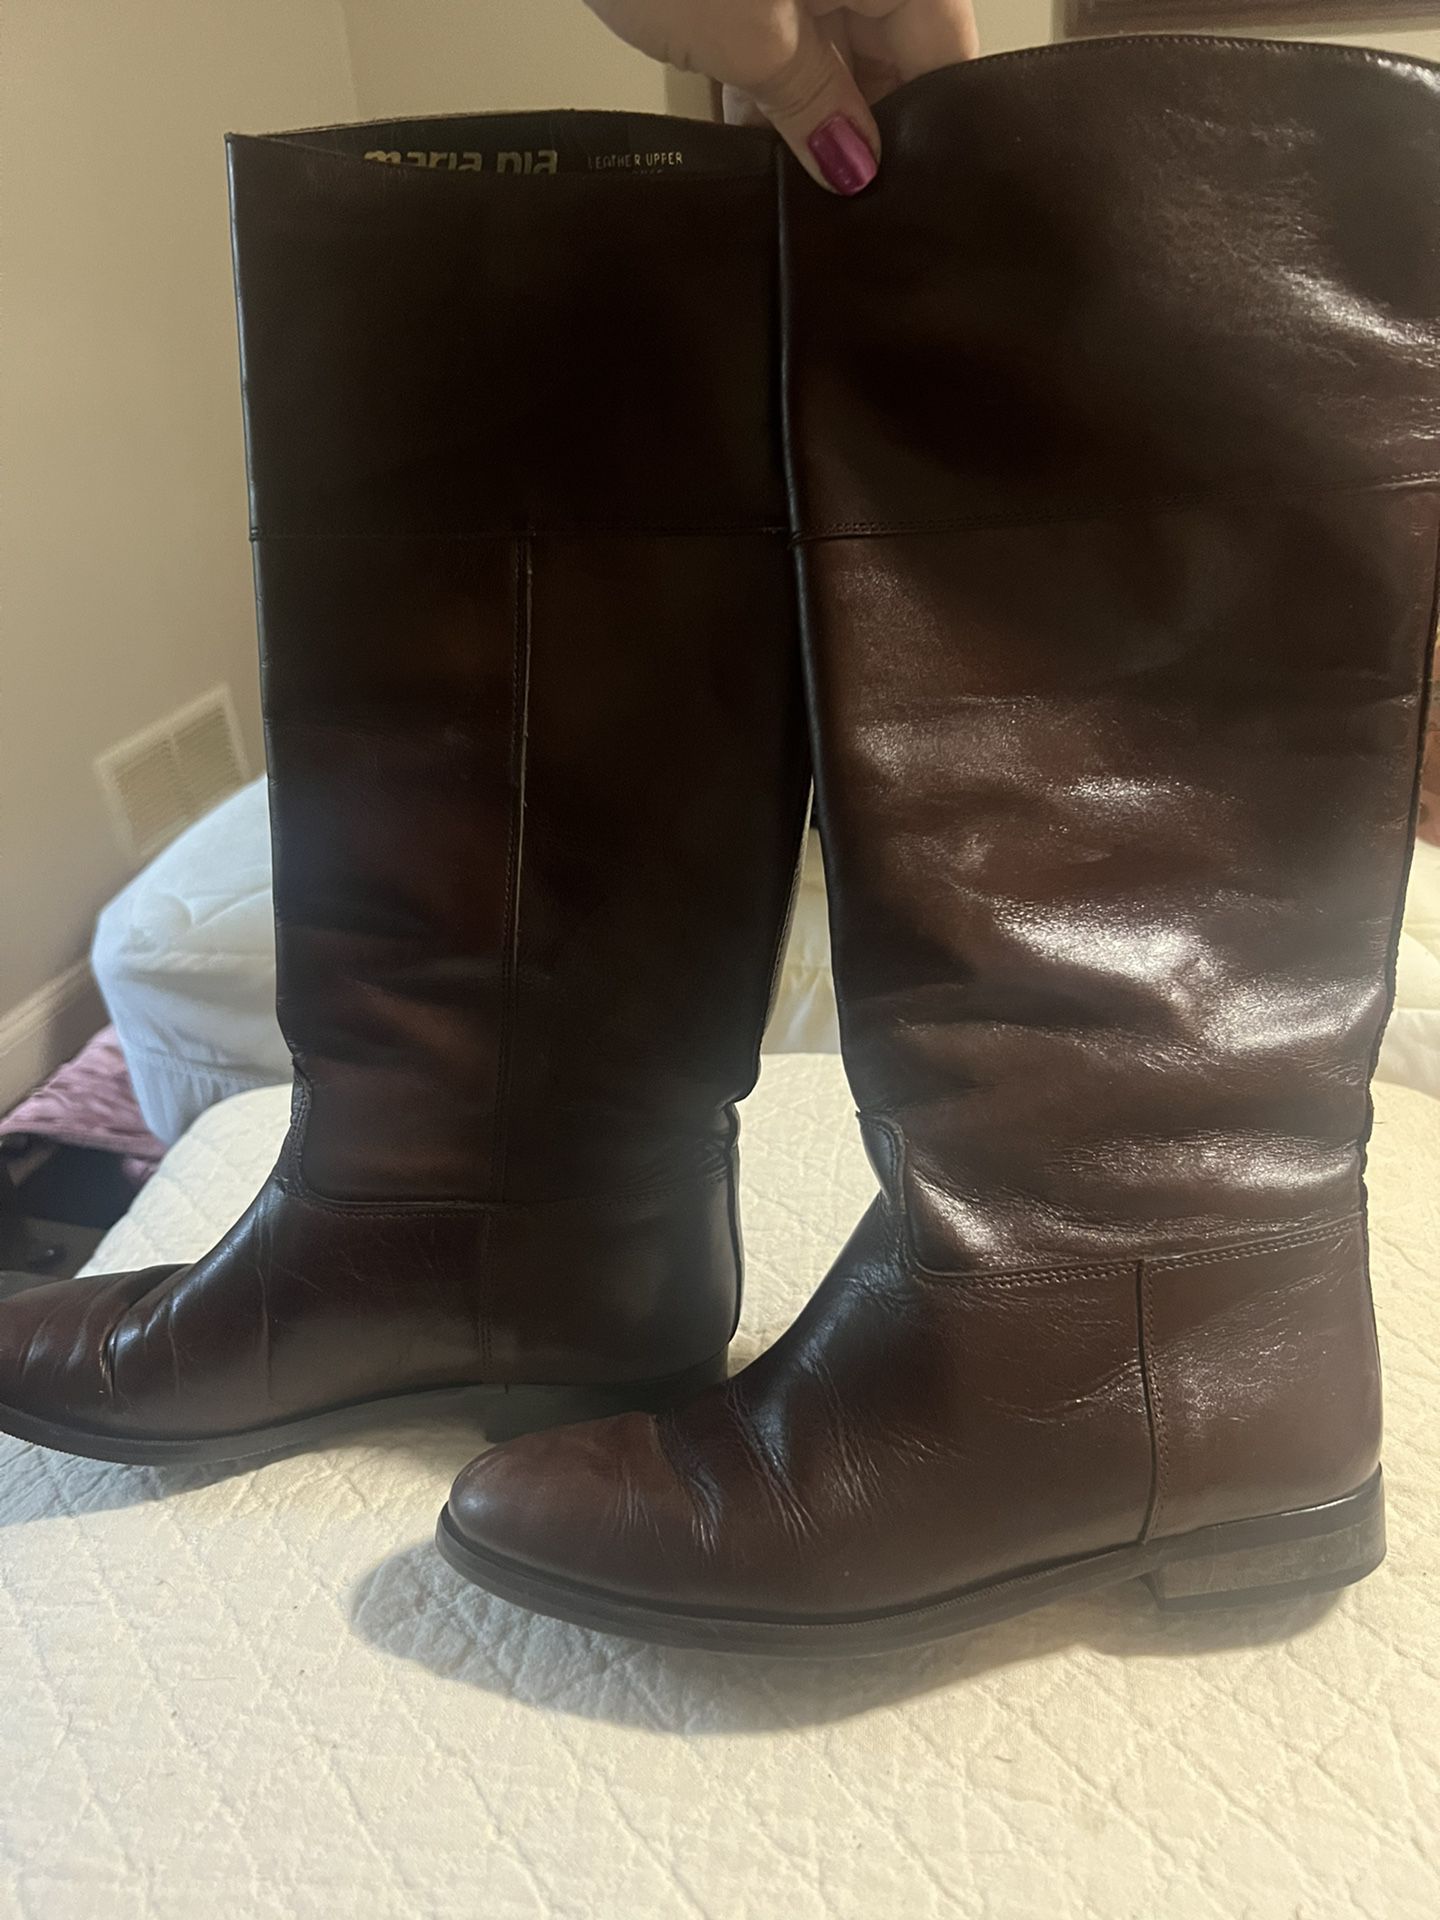 New Brown Boots, Maria Pia, Leather, In Box, 6.5